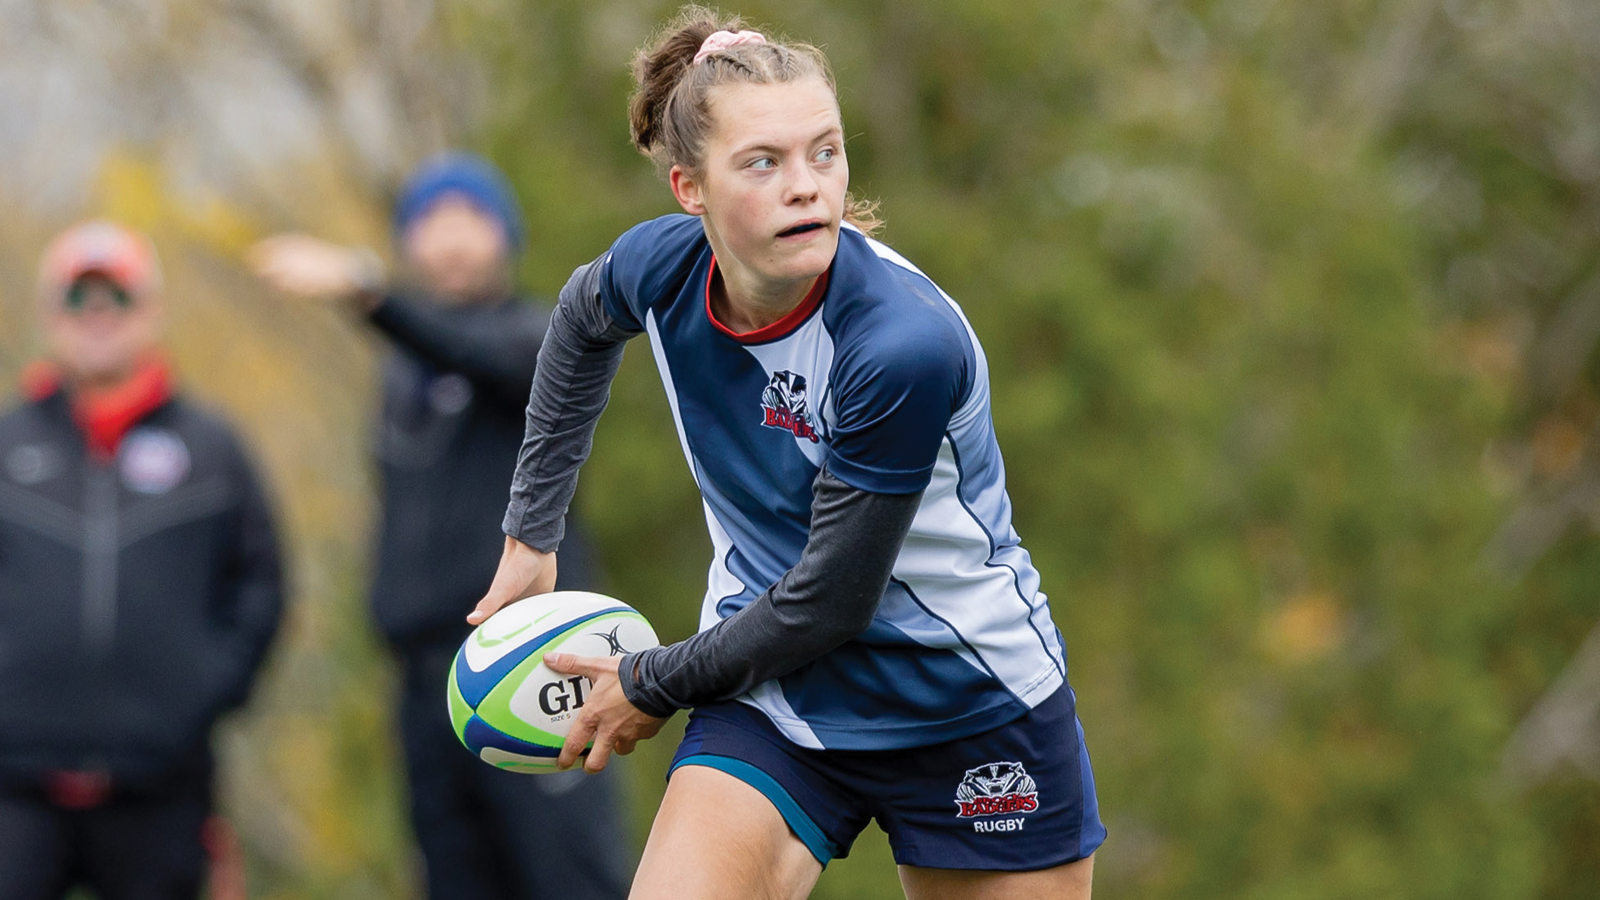 Action photo of Brock women's rugby player Paige DeNeve about to pass the ball during a game